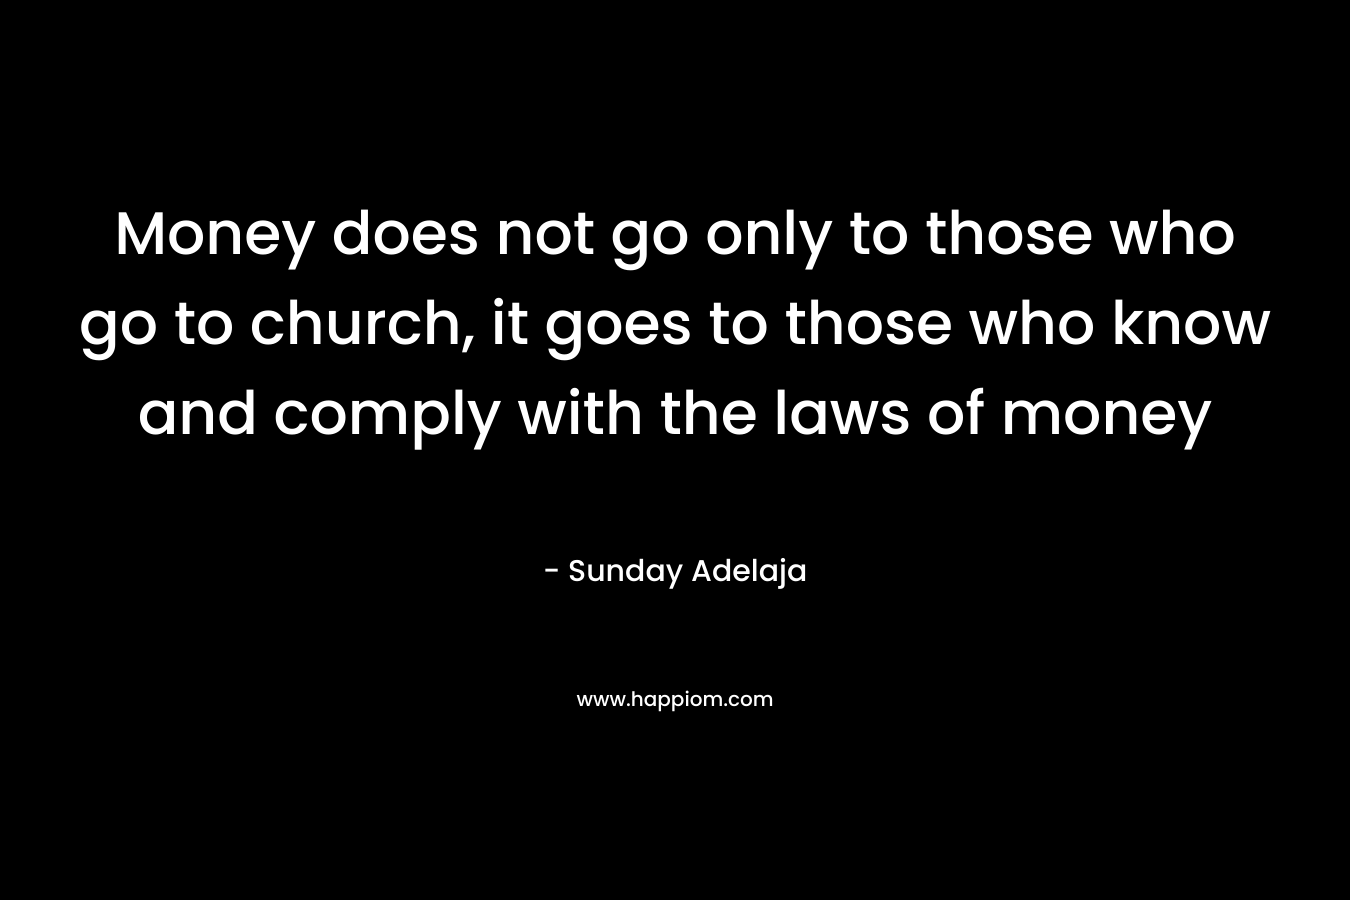 Money does not go only to those who go to church, it goes to those who know and comply with the laws of money